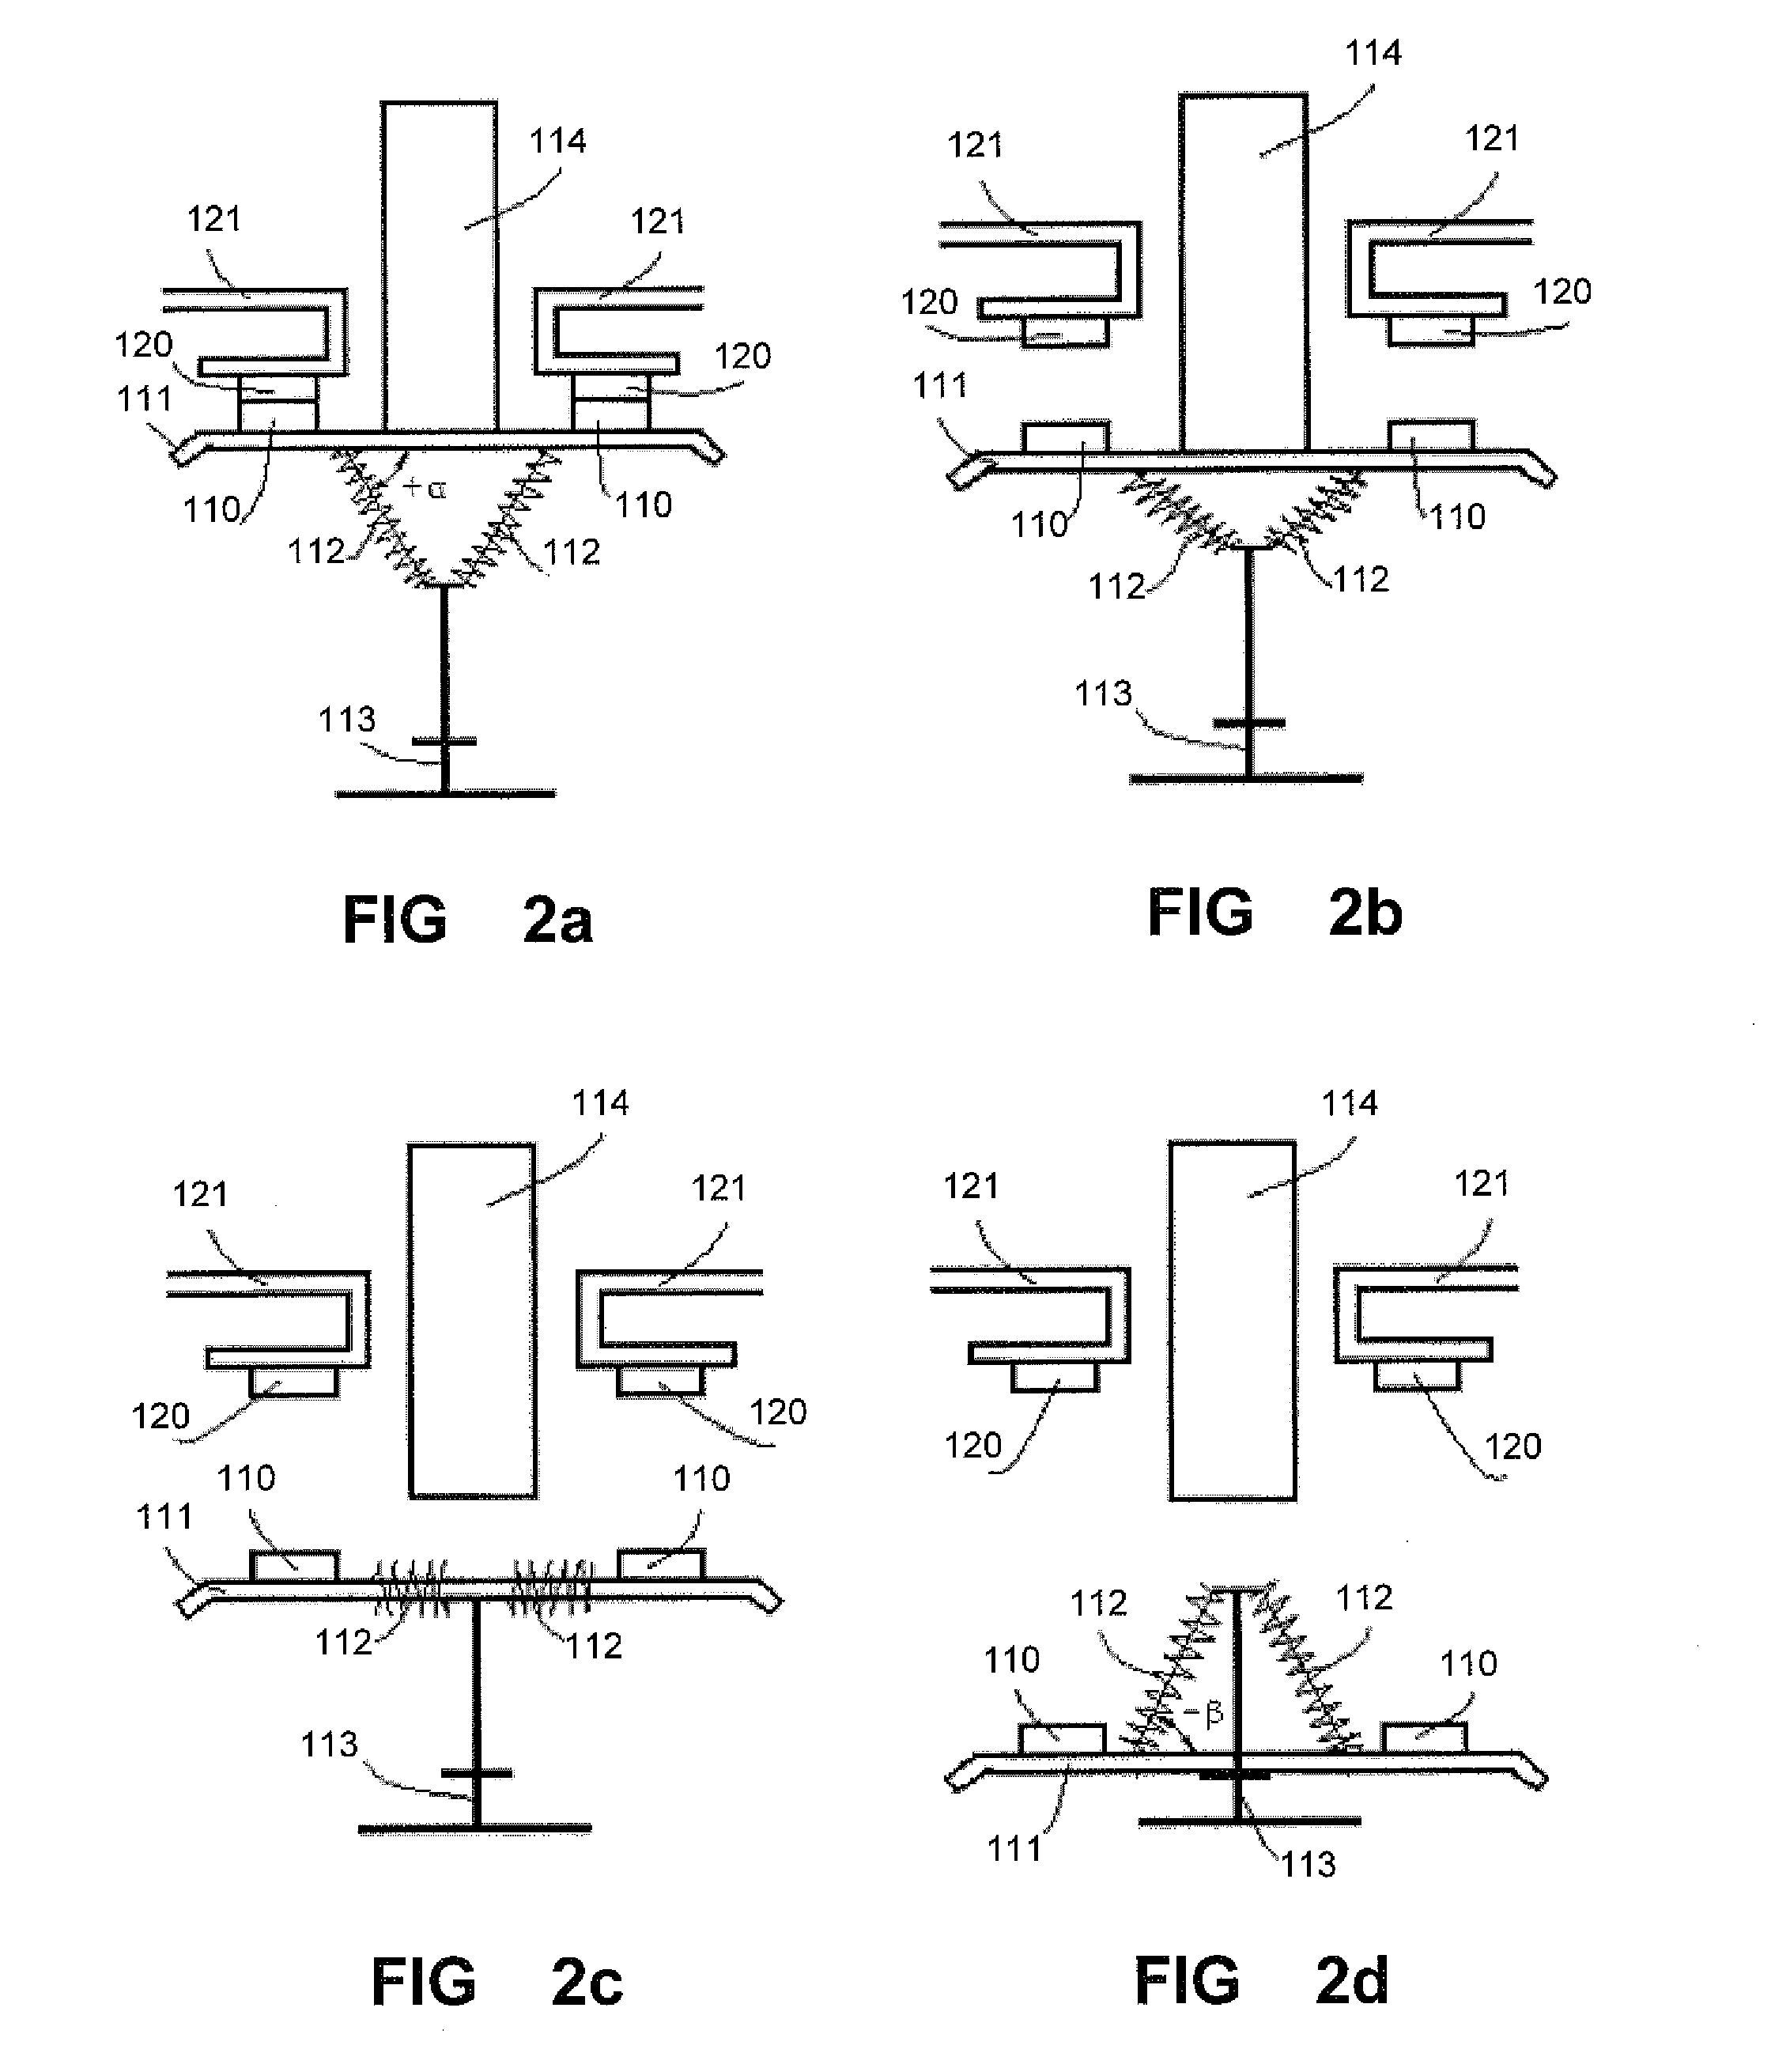 Contact structure of low-voltage electrical apparatus